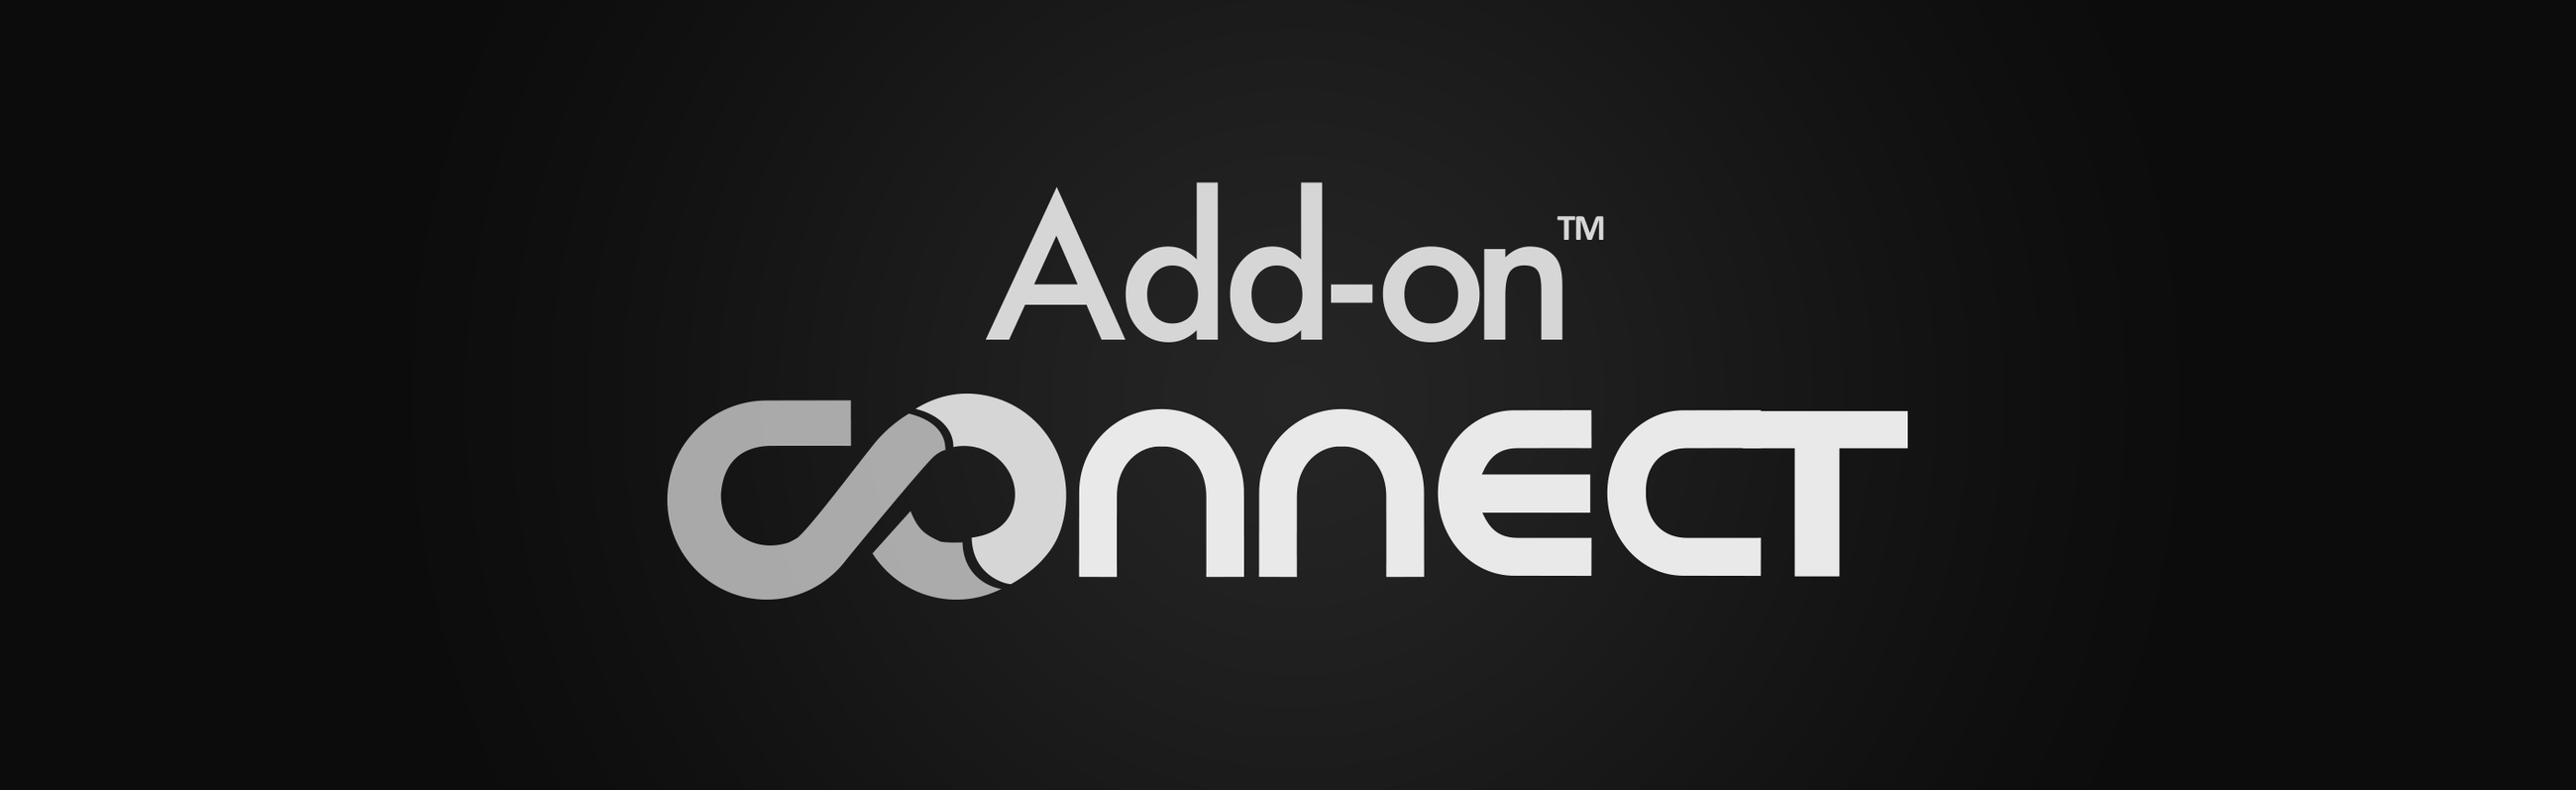 Add-on Connect